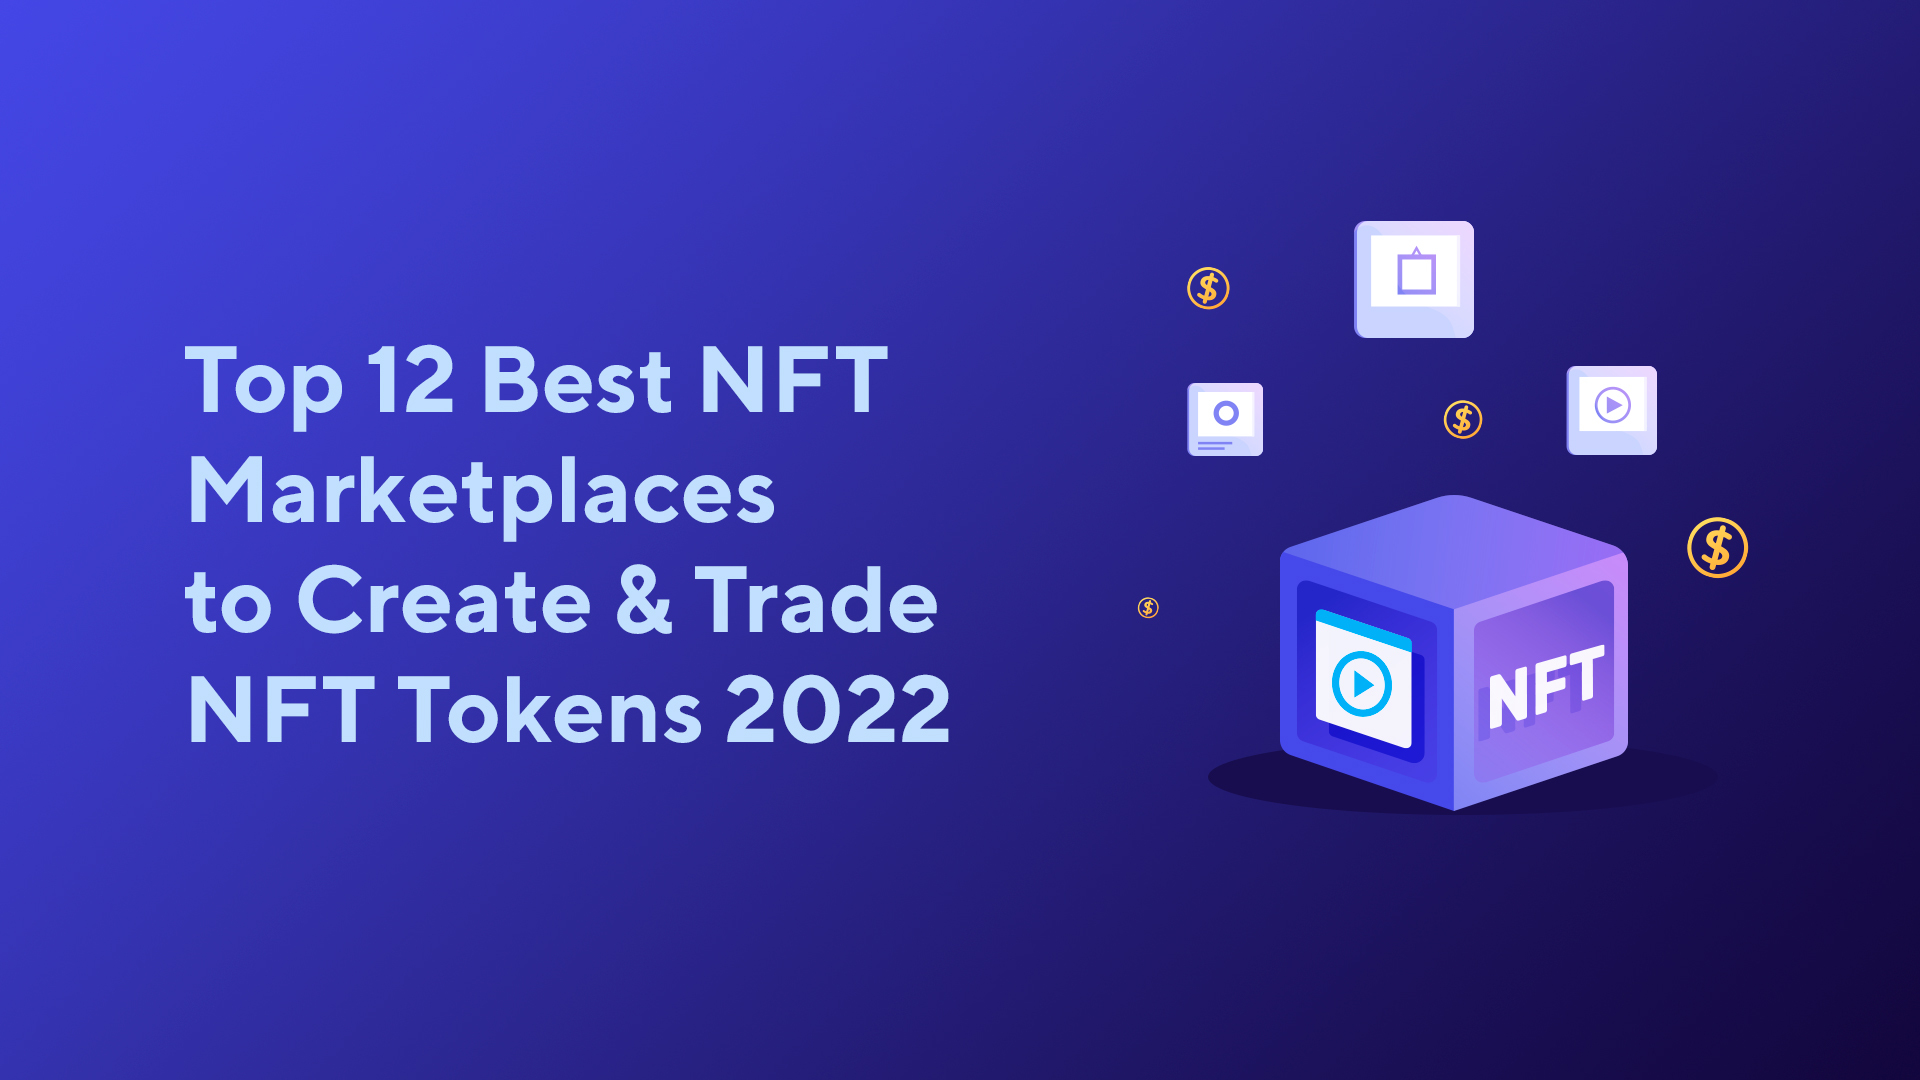 Top 12 Best NFT Marketplaces to Create & Trade NFT Tokens 2023